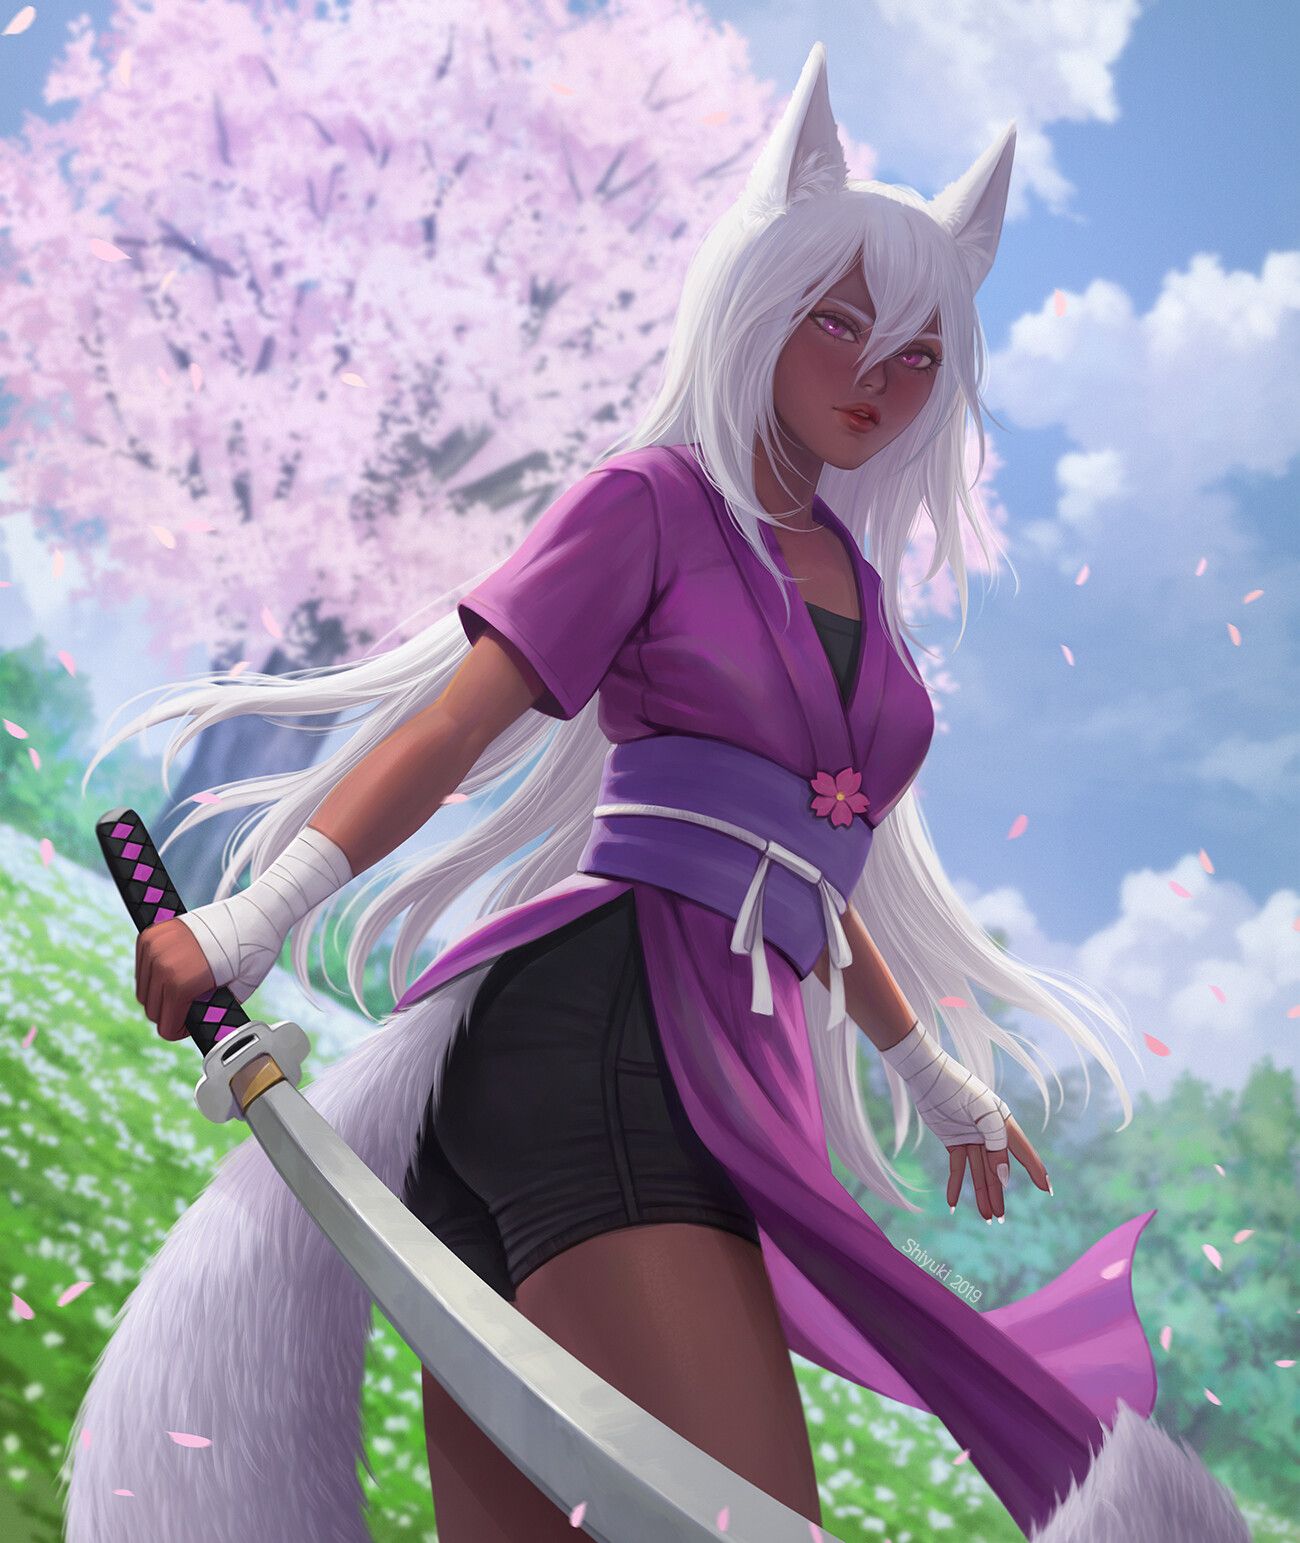 Albums 105+ Pictures Pictures Of A Kitsune Full HD, 2k, 4k